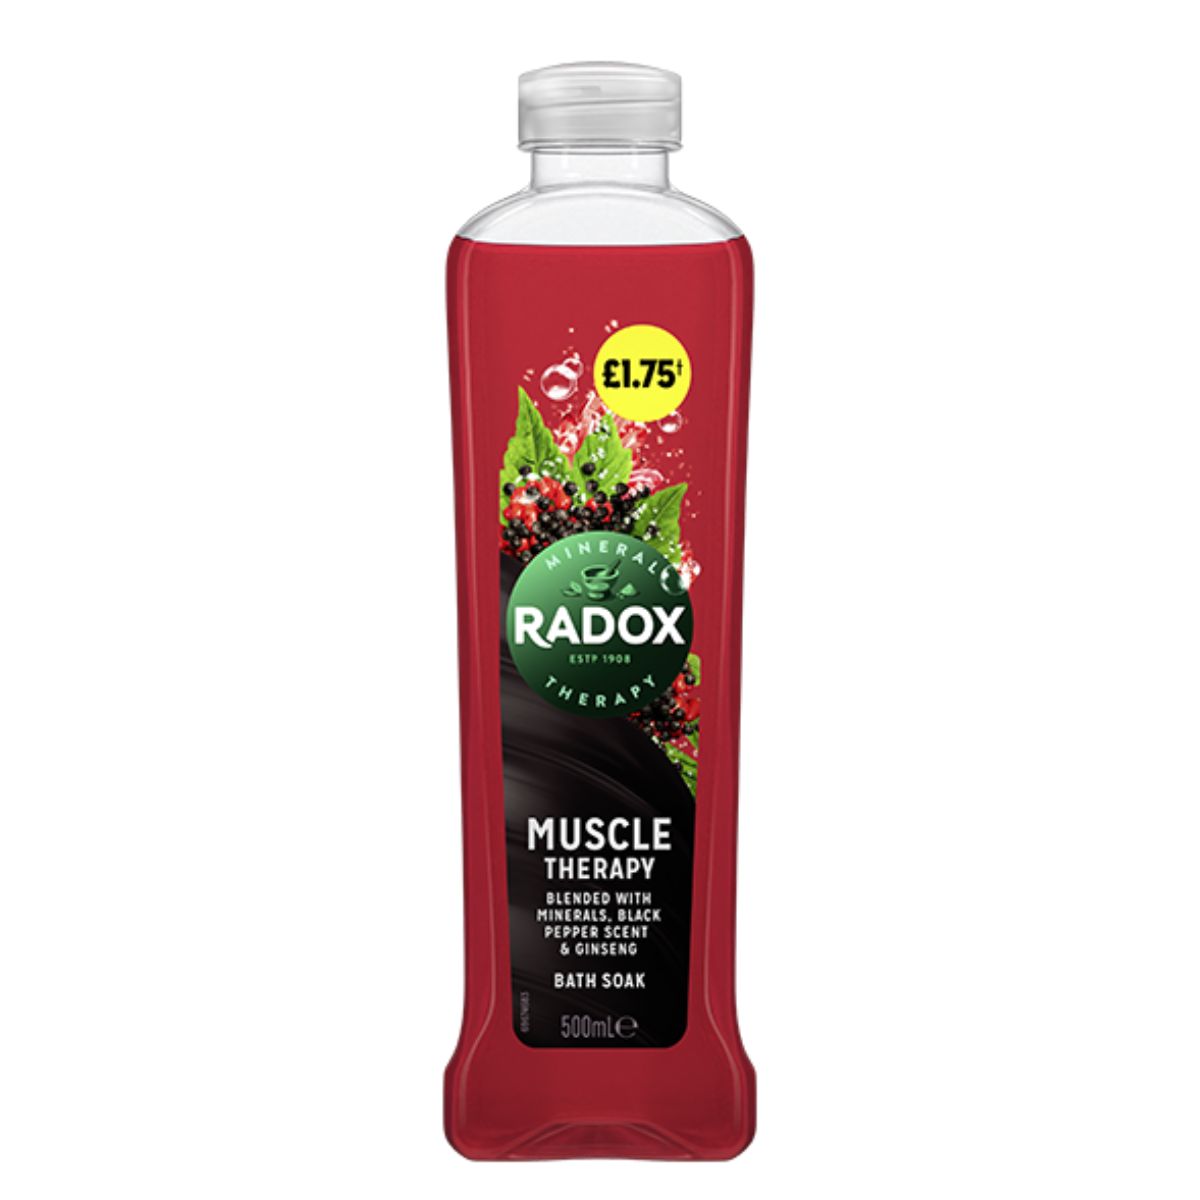 A bottle of Radox - Muscle Therapy Bath Soak - 500ml on a white background.